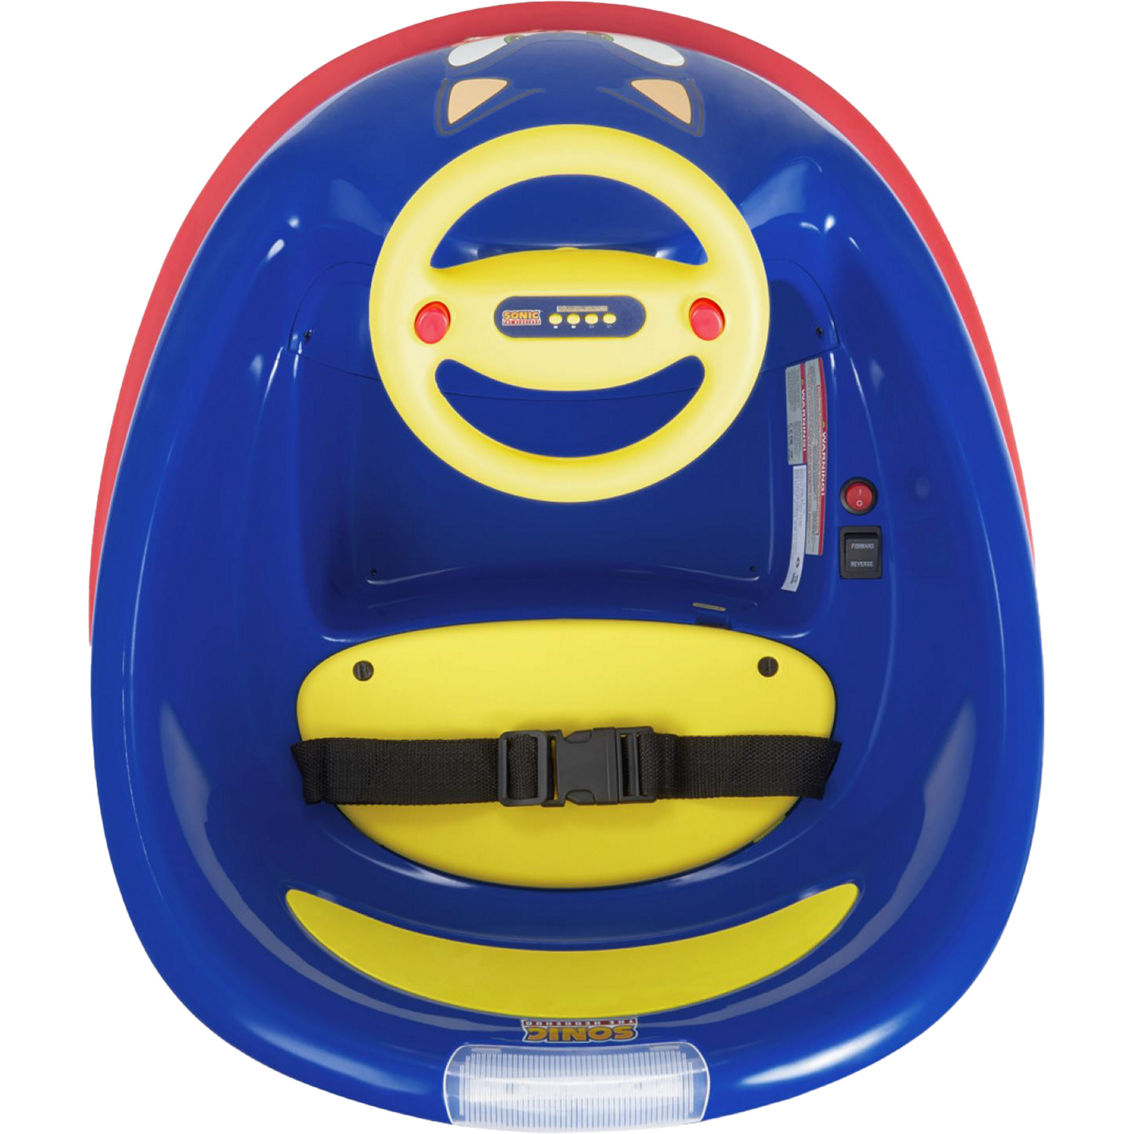 Sonic the Hedgehog Electric Ride On Bumper Car - Image 5 of 8